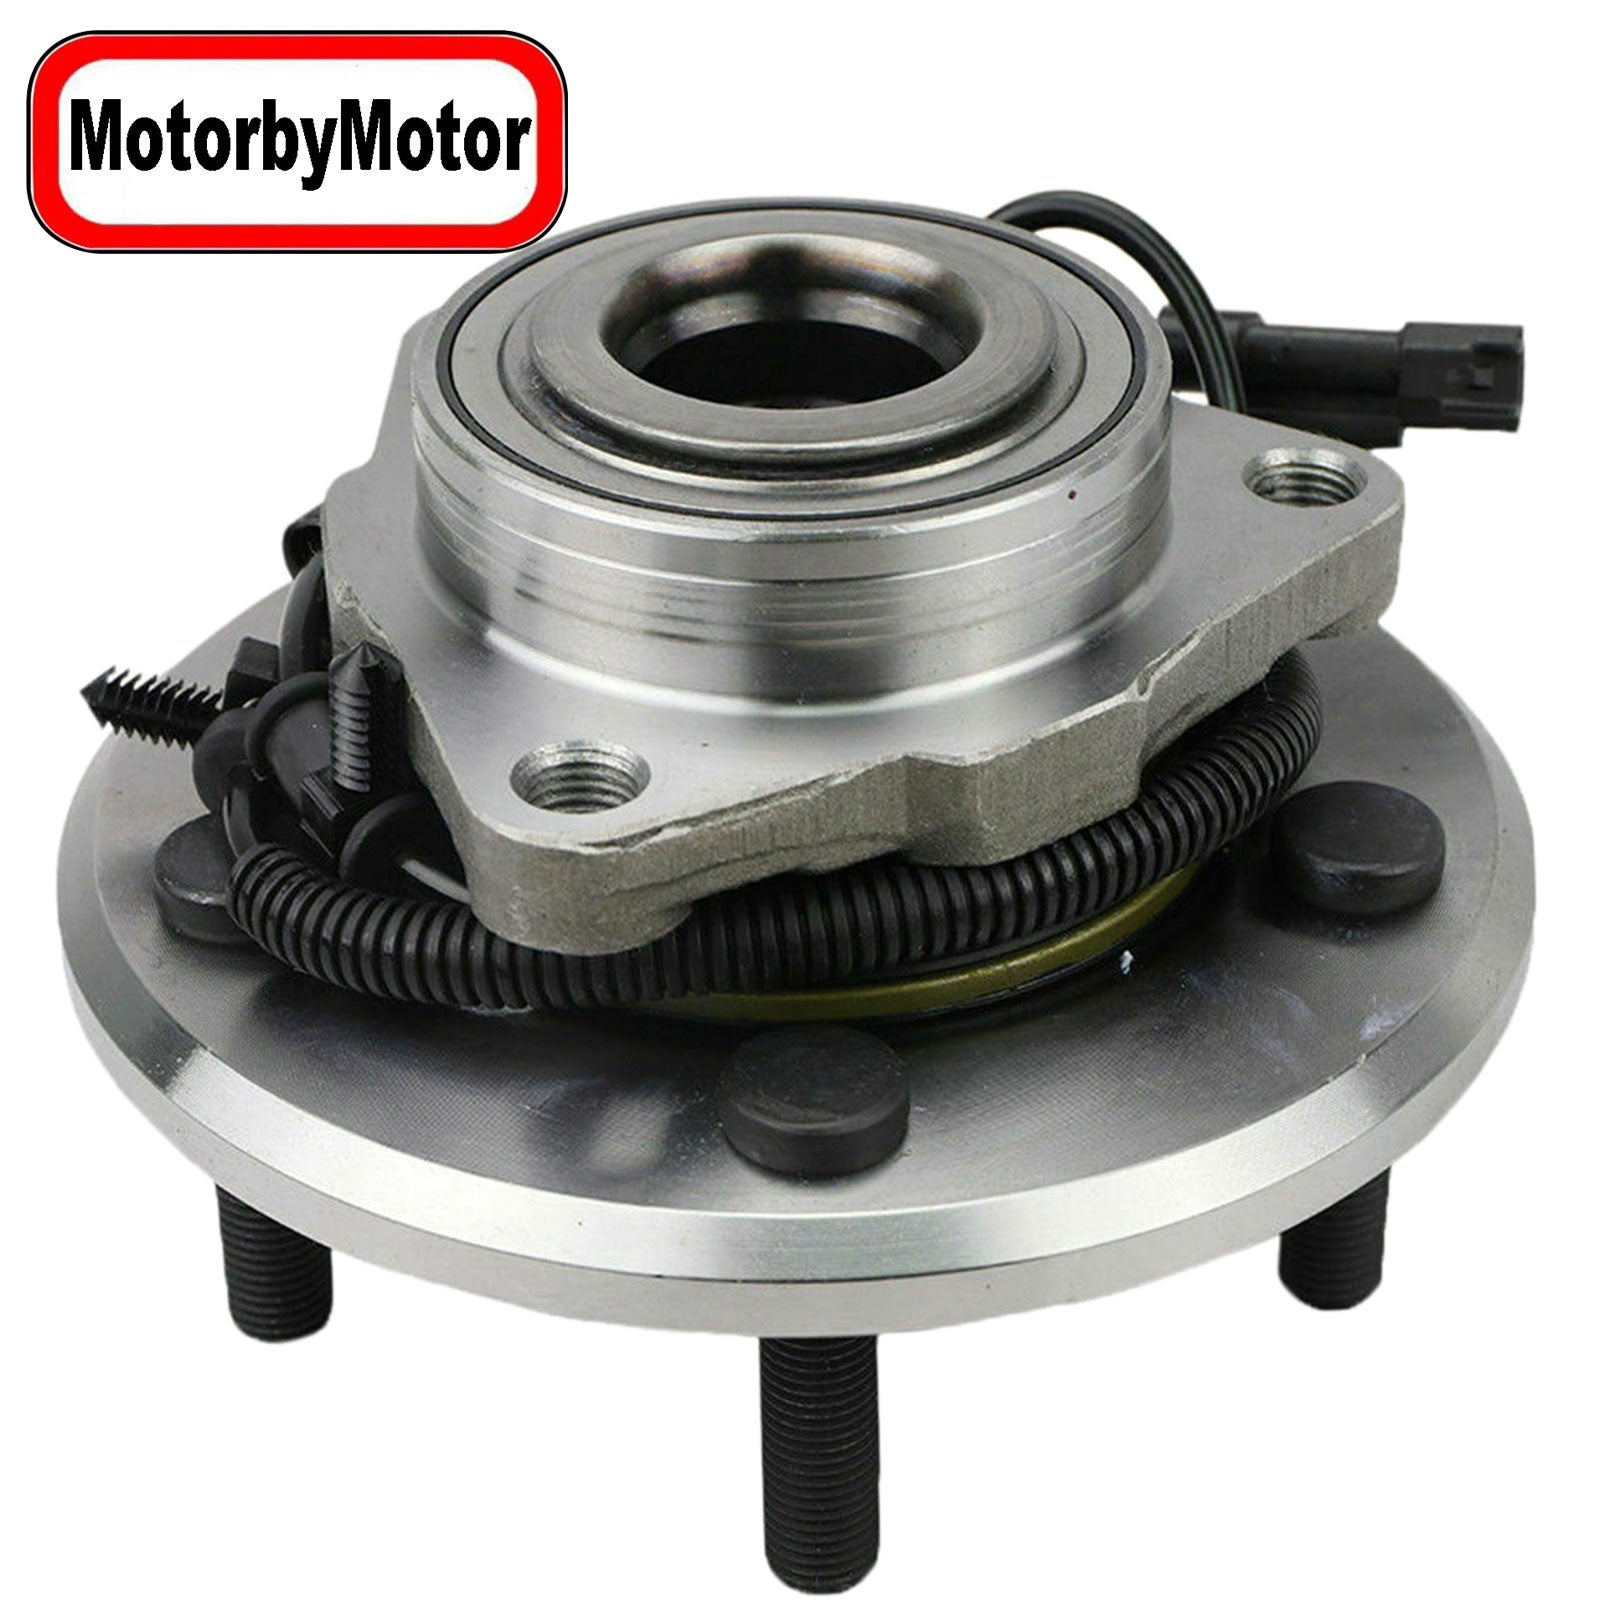 MotorbyMotor HA590515 Front Heavy Duty Wheel Bearing Assembly with 5 Lugs Fits for 2012-2018 Dodge Ram 1500 Wheel Bearing and Hub Assembly (All Models) MotorbyMotor